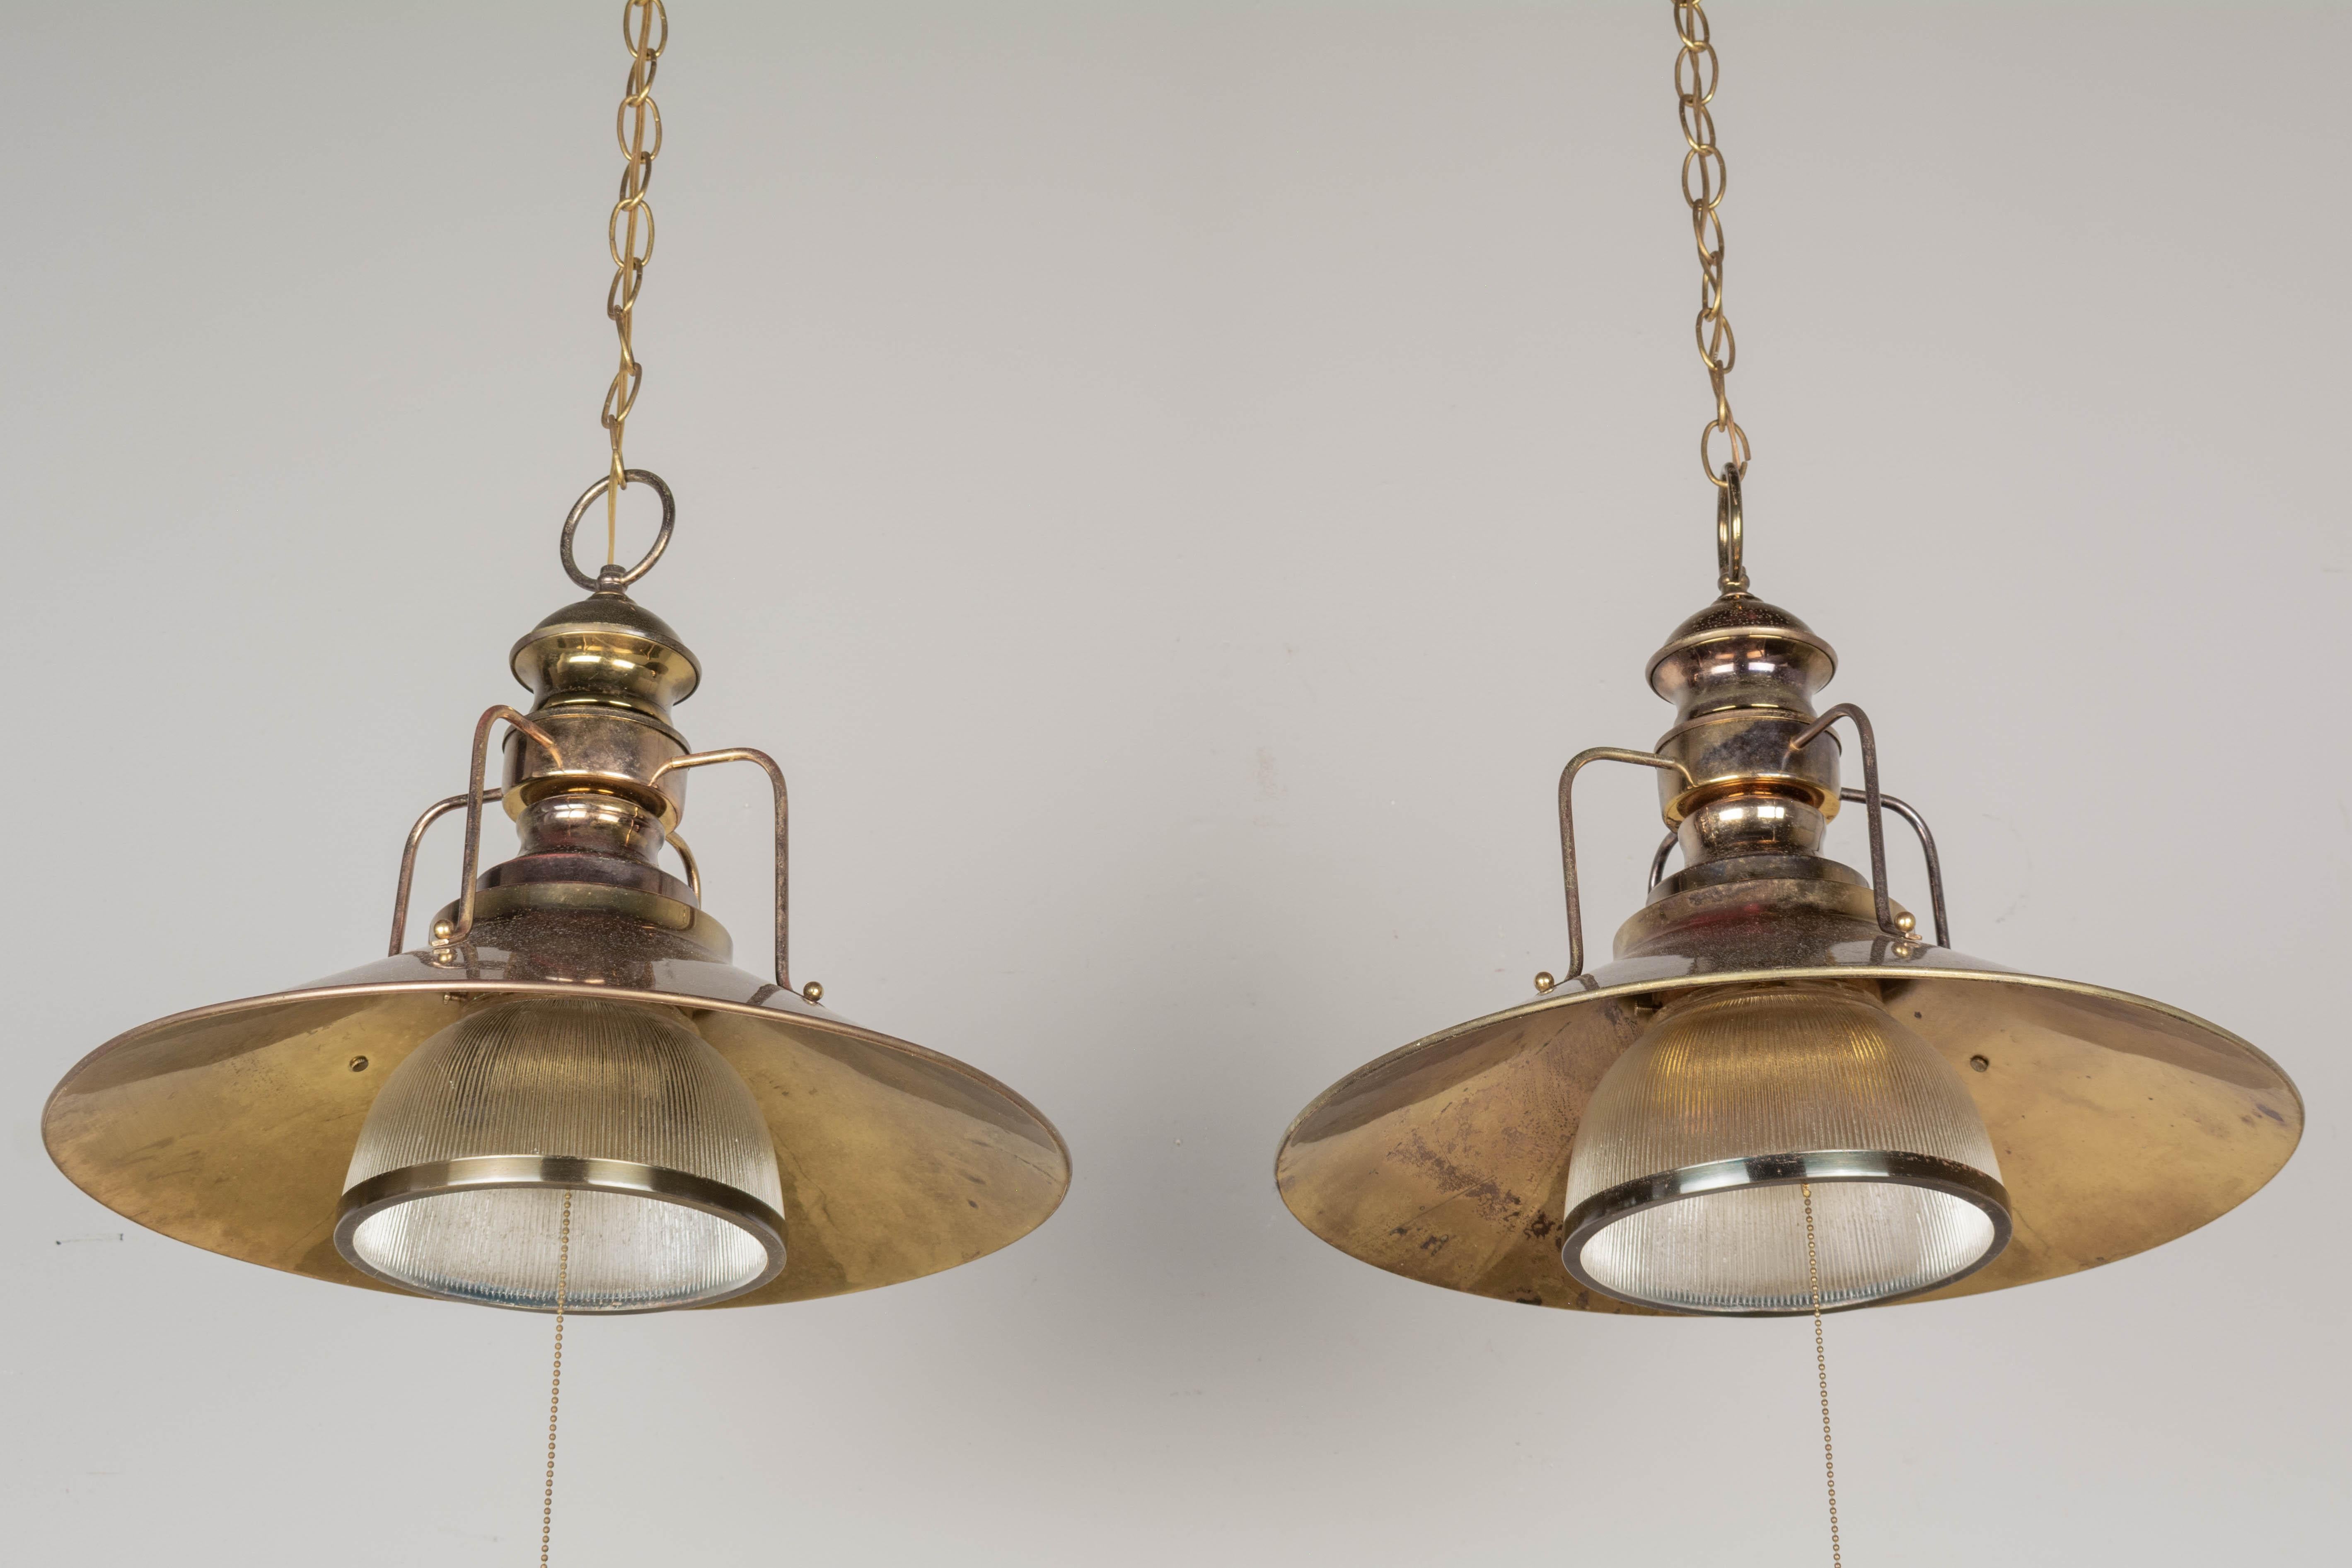 20th Century Industrial Railway Station Pendant Lights, a Pair